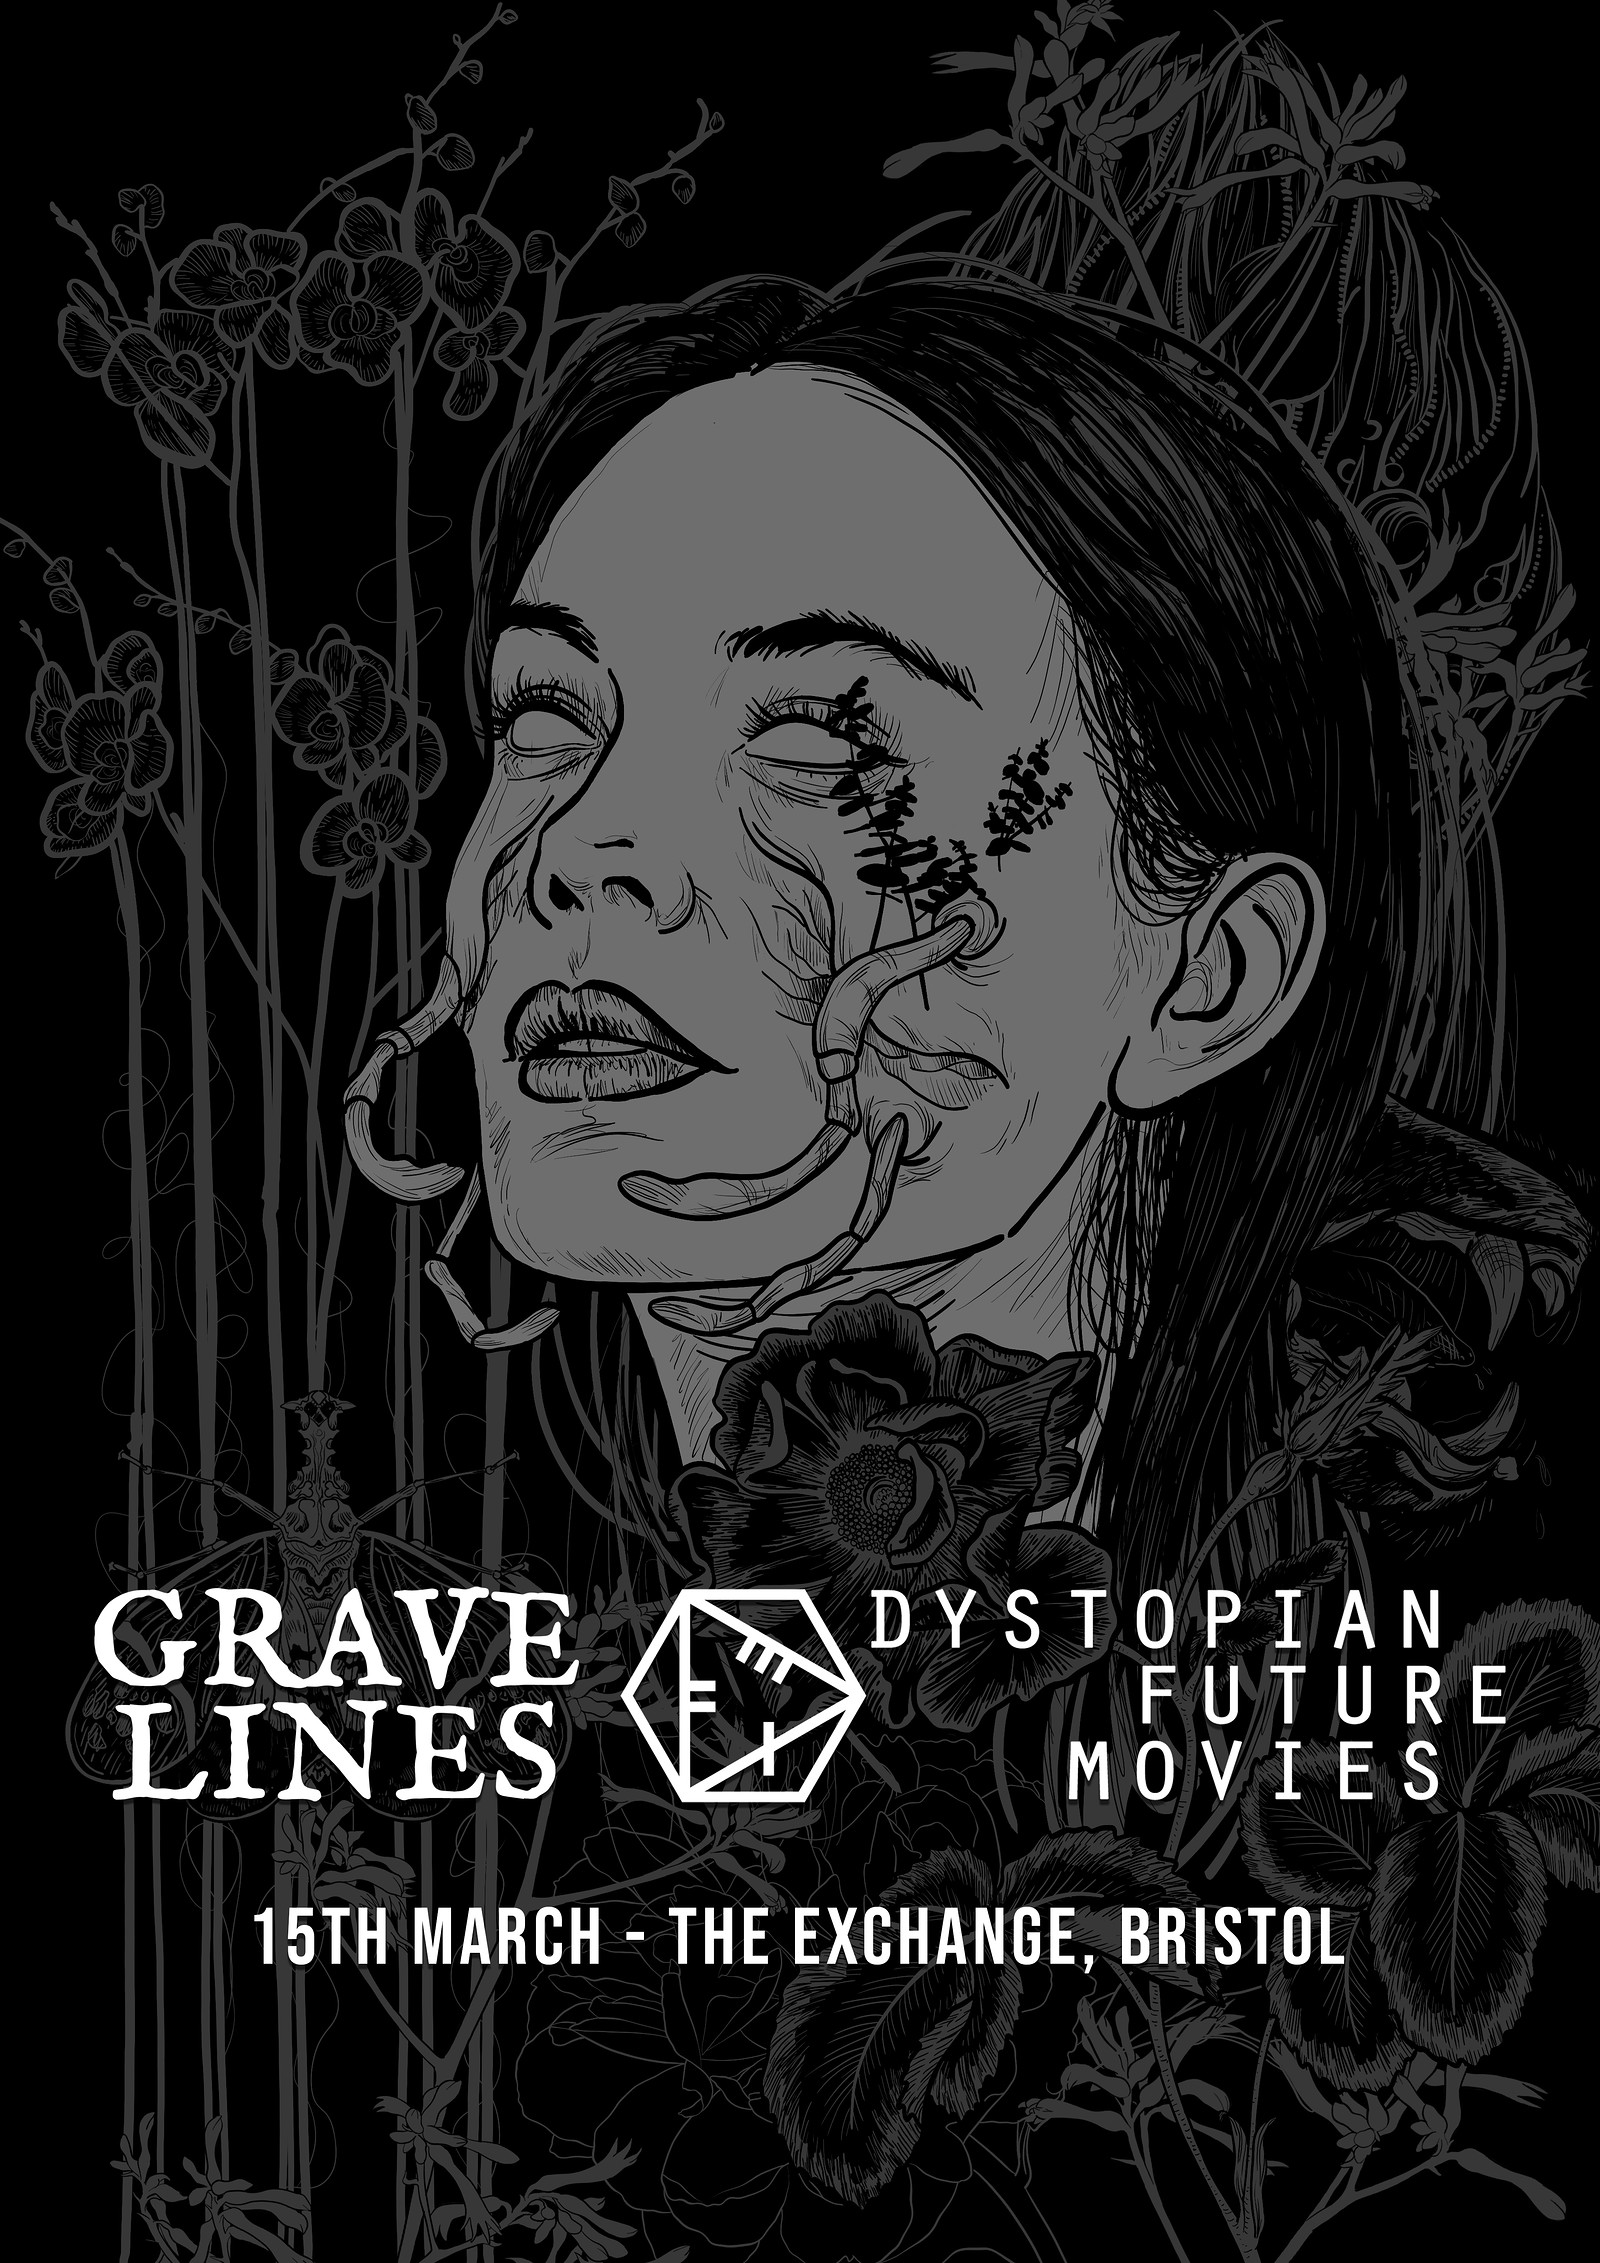 Dystopian Future Movies x Grave Lines at Exchange